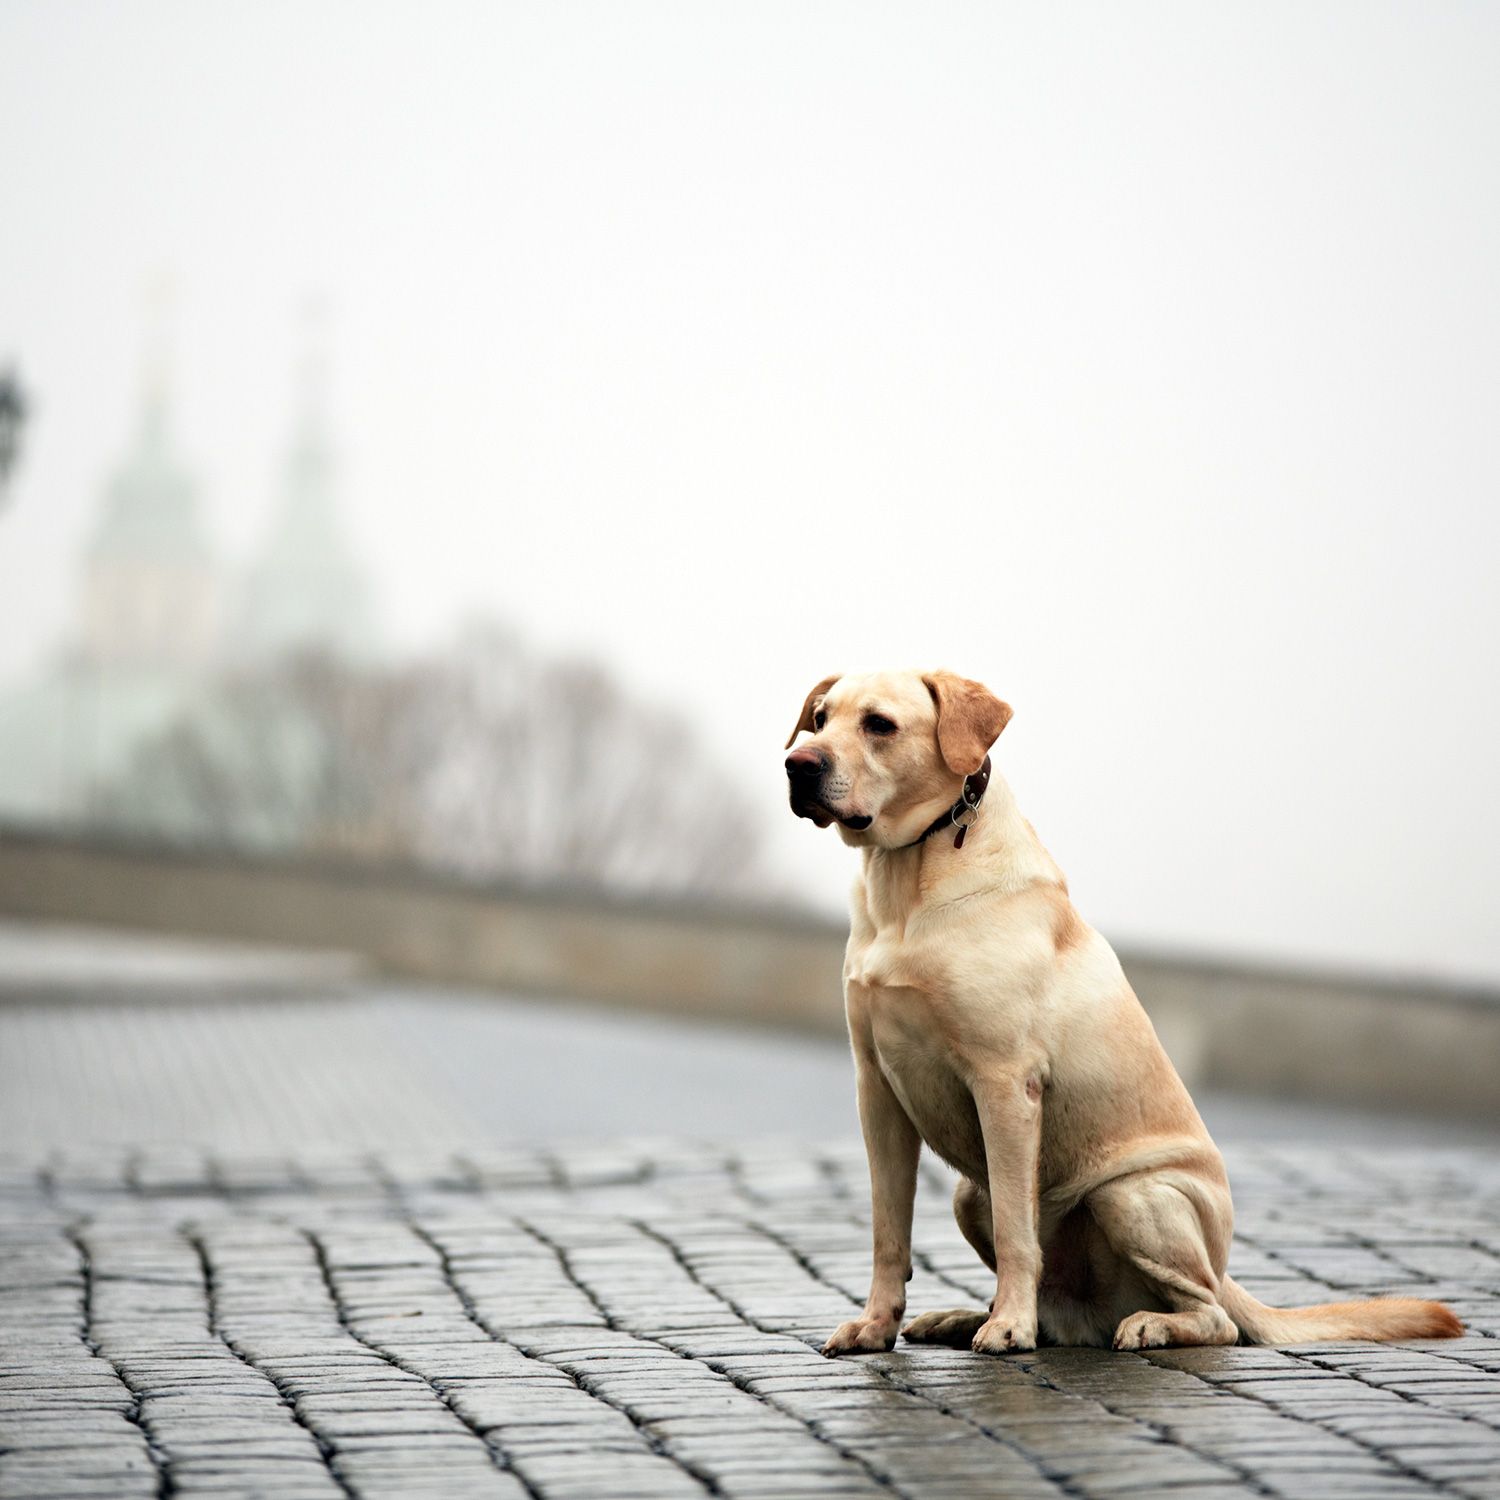 dog-street-lonely | Sweet Dogs, Cats, & Other Critters | Pinterest ...